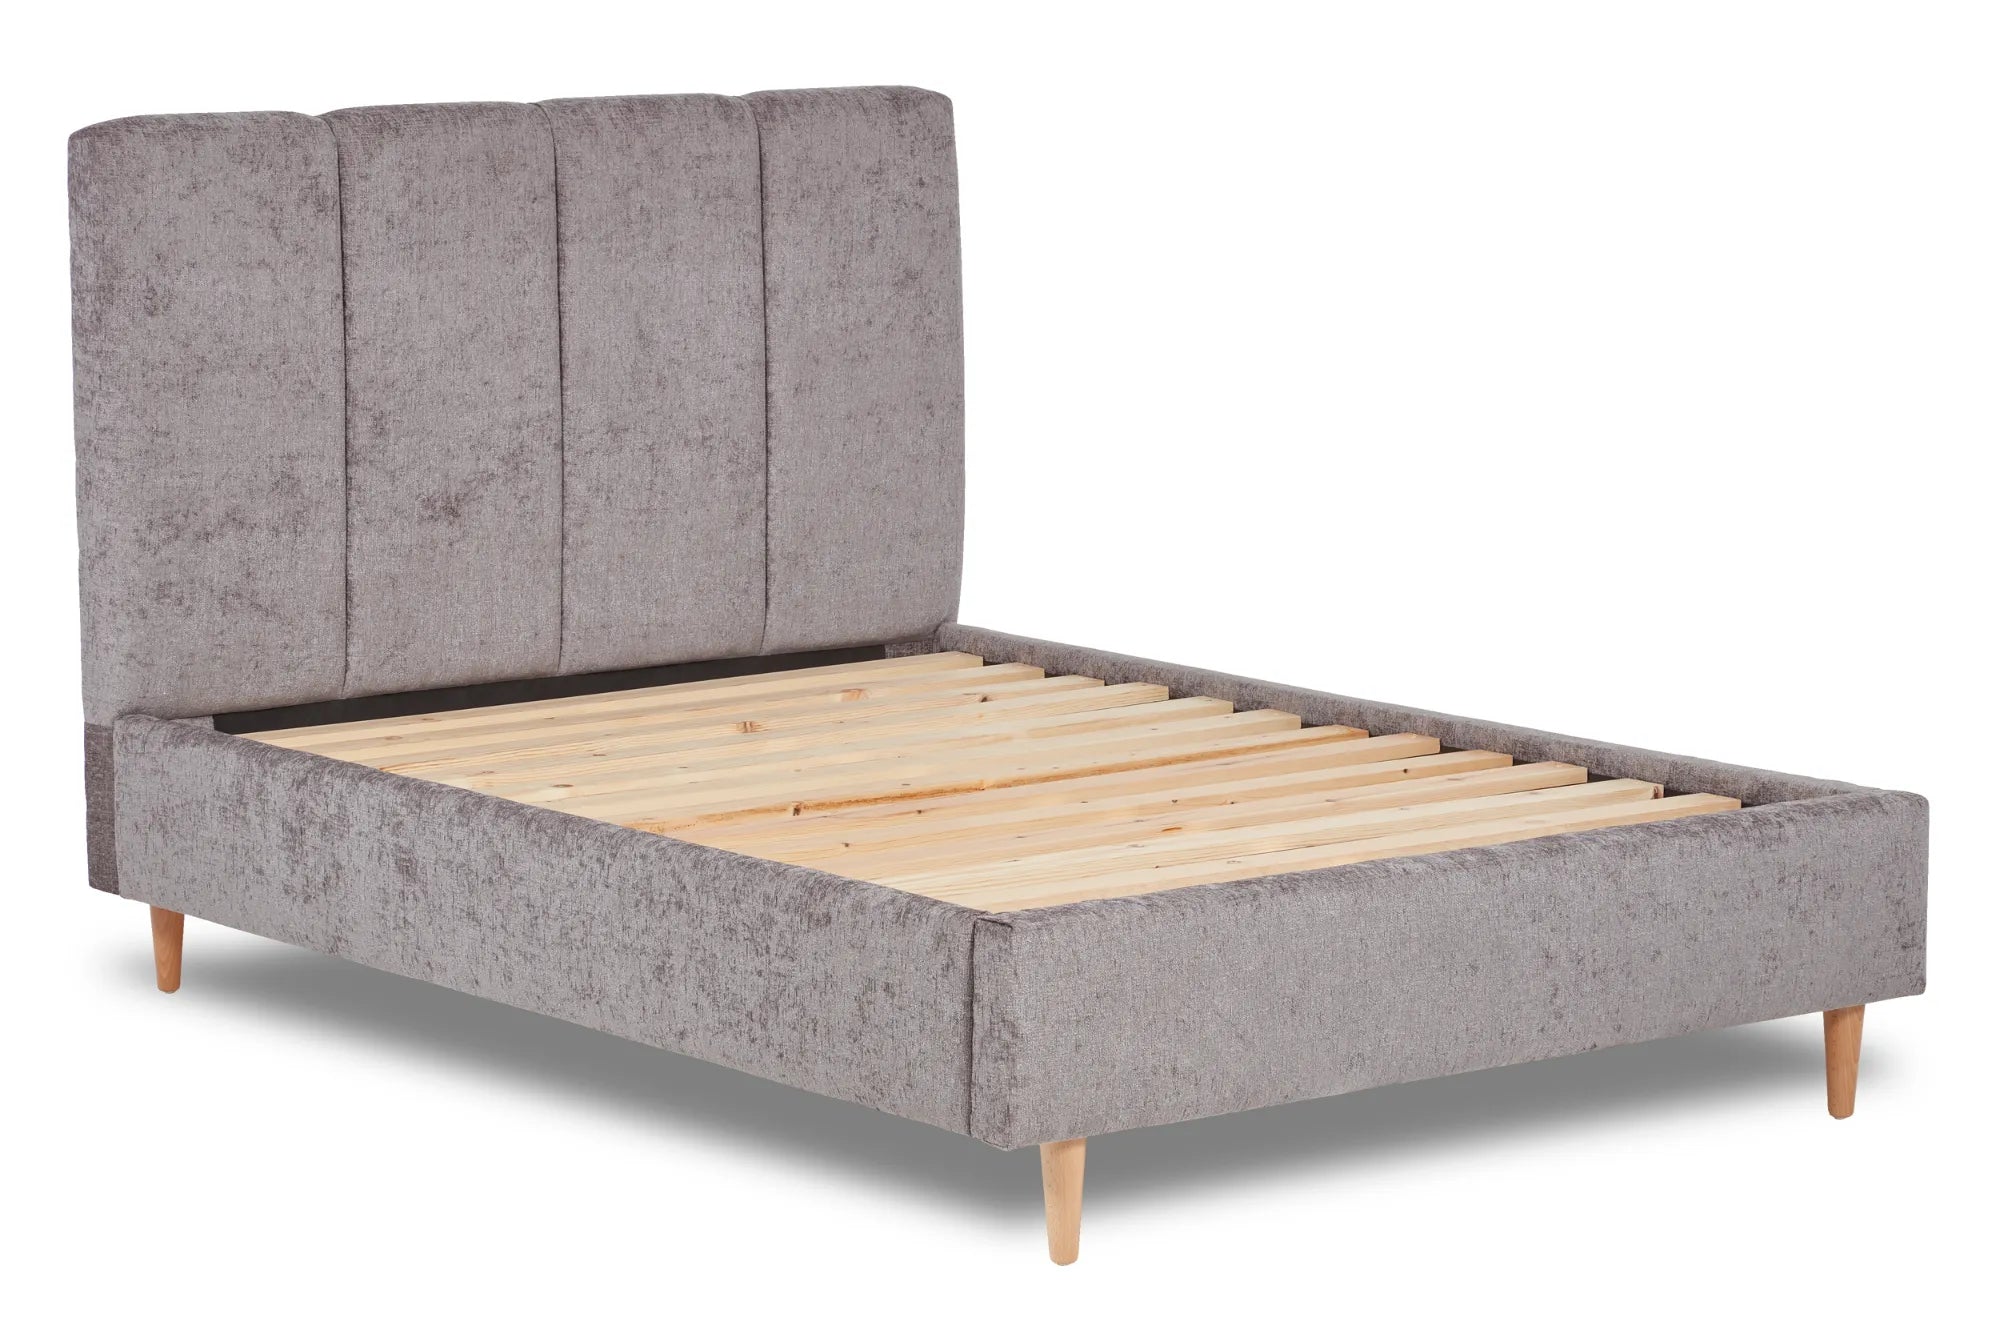 Zen Fabric Bed With Fluted Headboard Panels